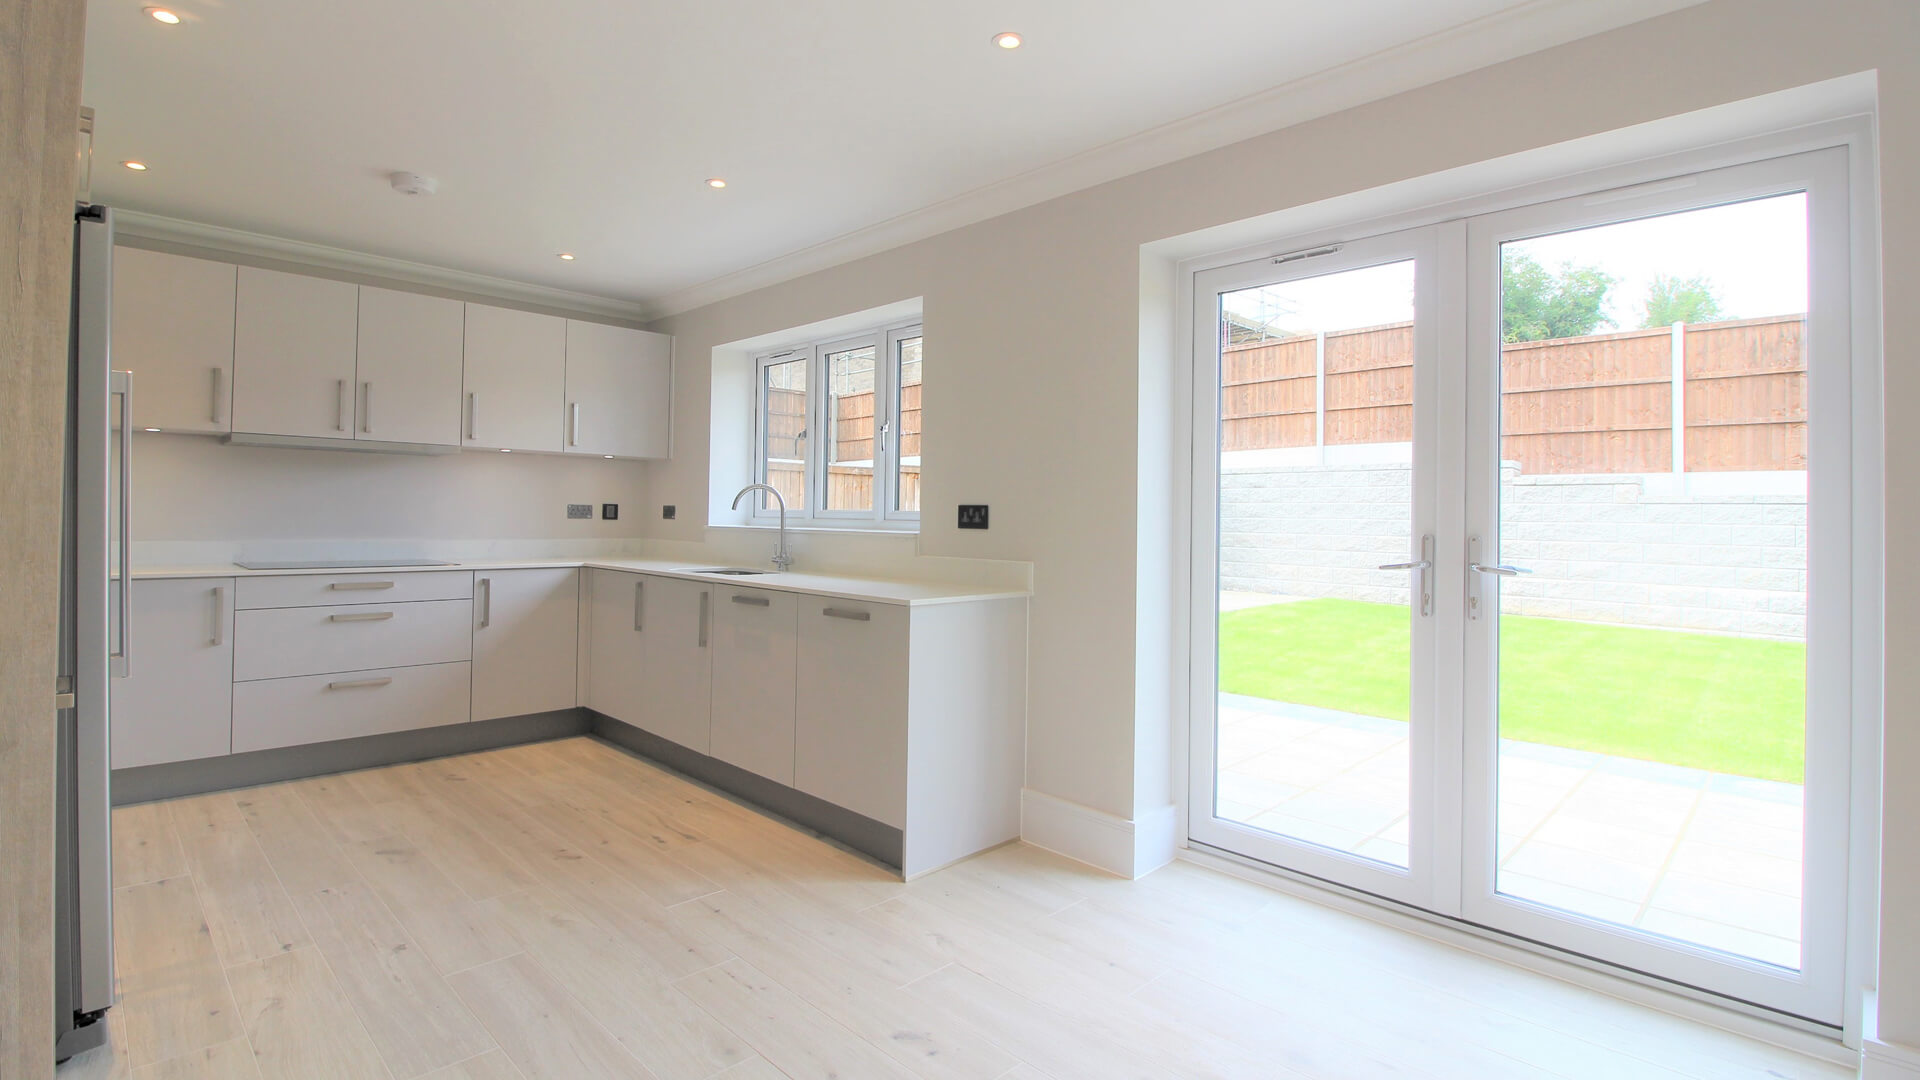 White fitted kitchen at Woodside court.